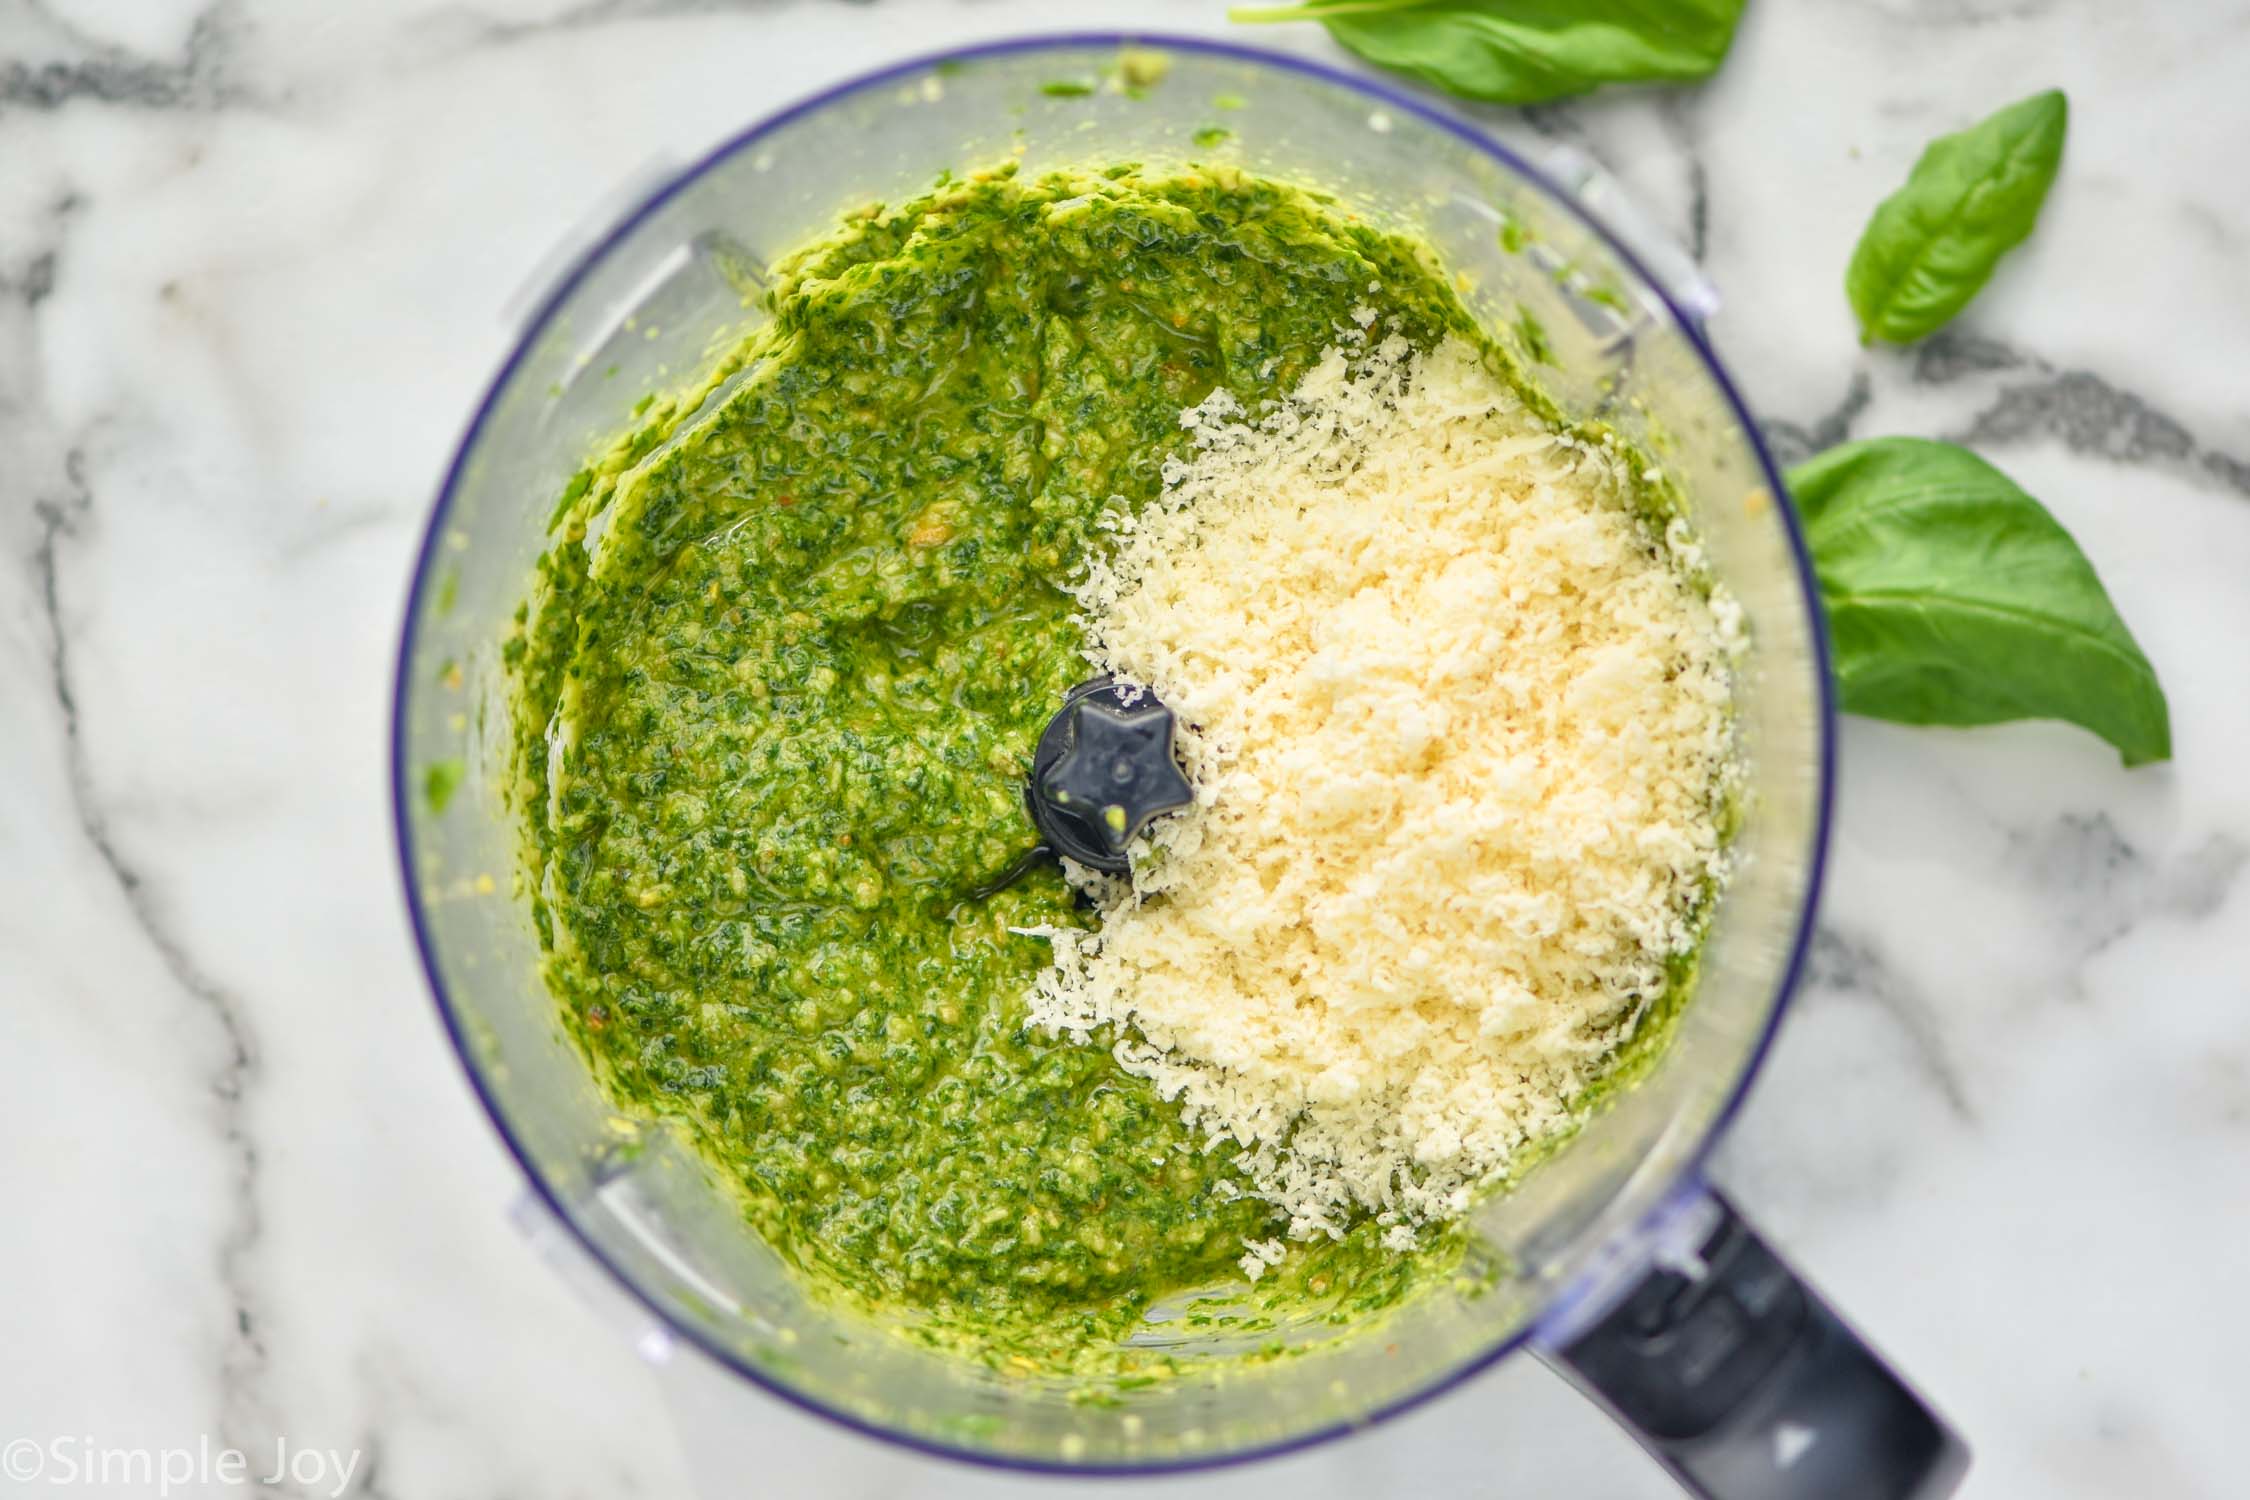 Overhead photo of a food processor of ingredients processed for Pesto Sauce Recipe.